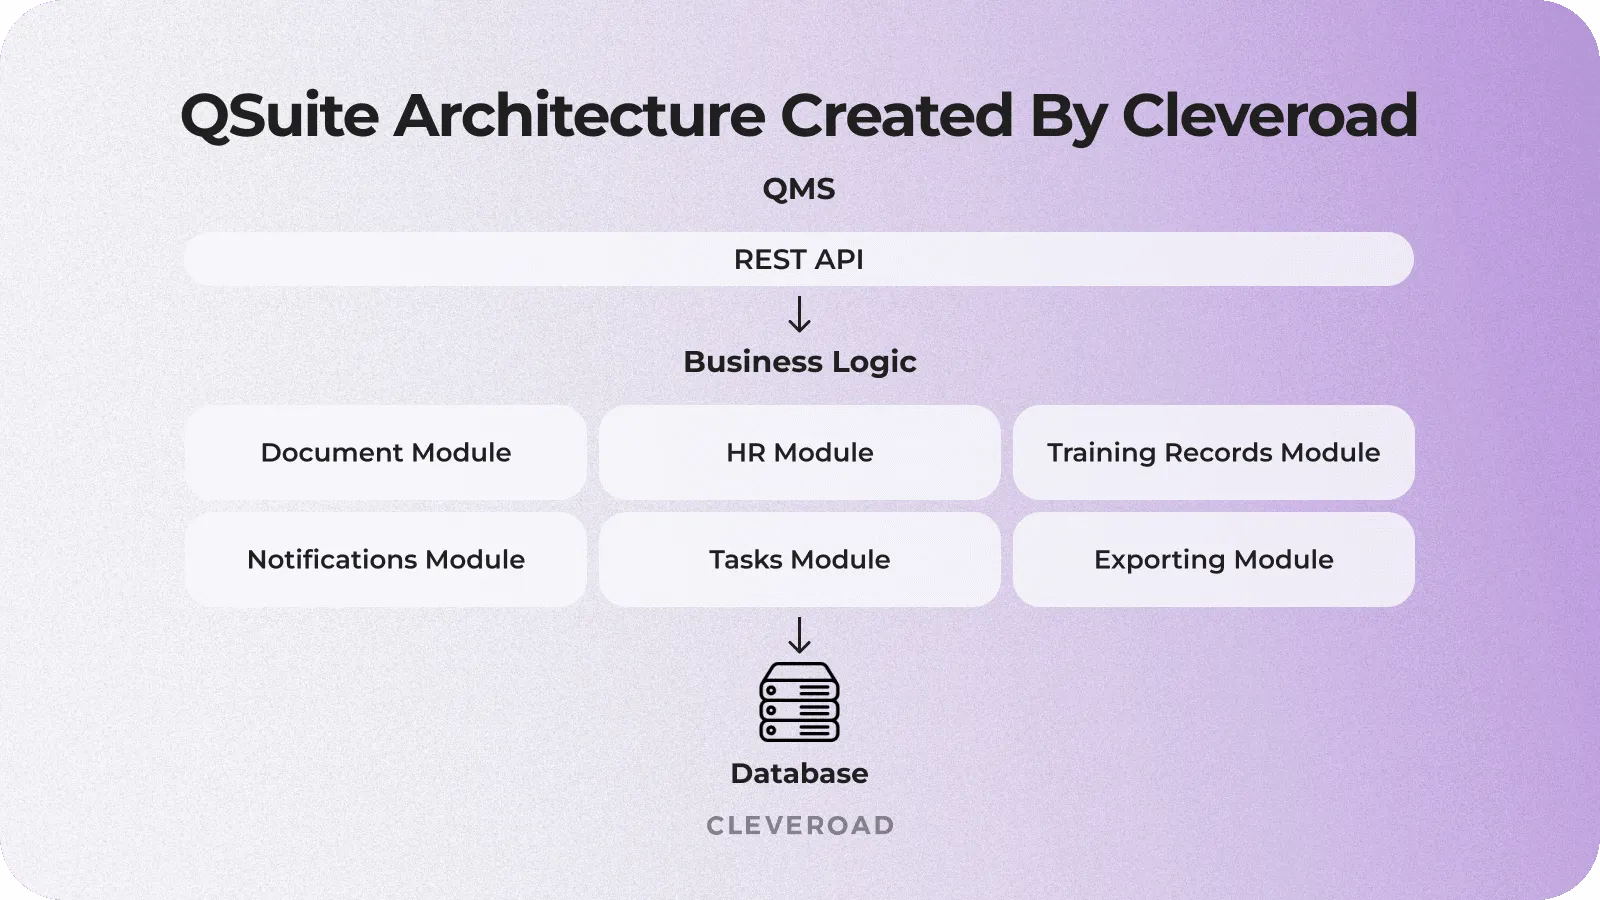 Enterprise software architecture on the example of QMS software created by Cleveroad